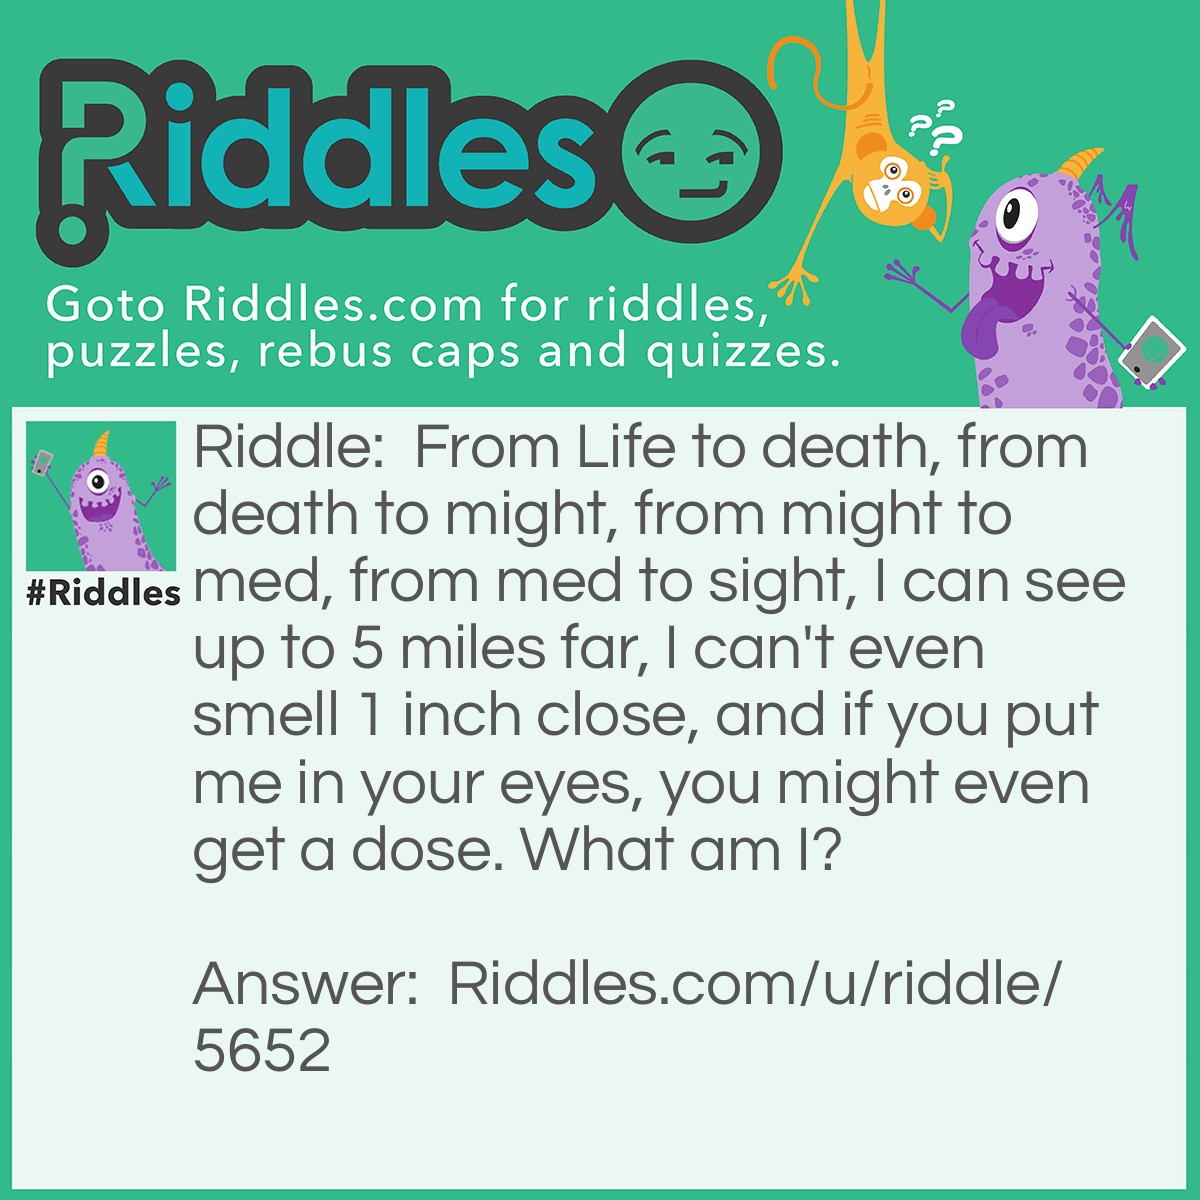 Riddle: From Life to death, from death to might, from might to med, from med to sight, I can see up to 5 miles far, I can't even smell 1 inch close, and if you put me in your eyes, you might even get a dose. What am I? Answer: Contact lenses a magnifying glass, they are used for multiple purposes in different cultures and can help you see up to 5 miles close up.